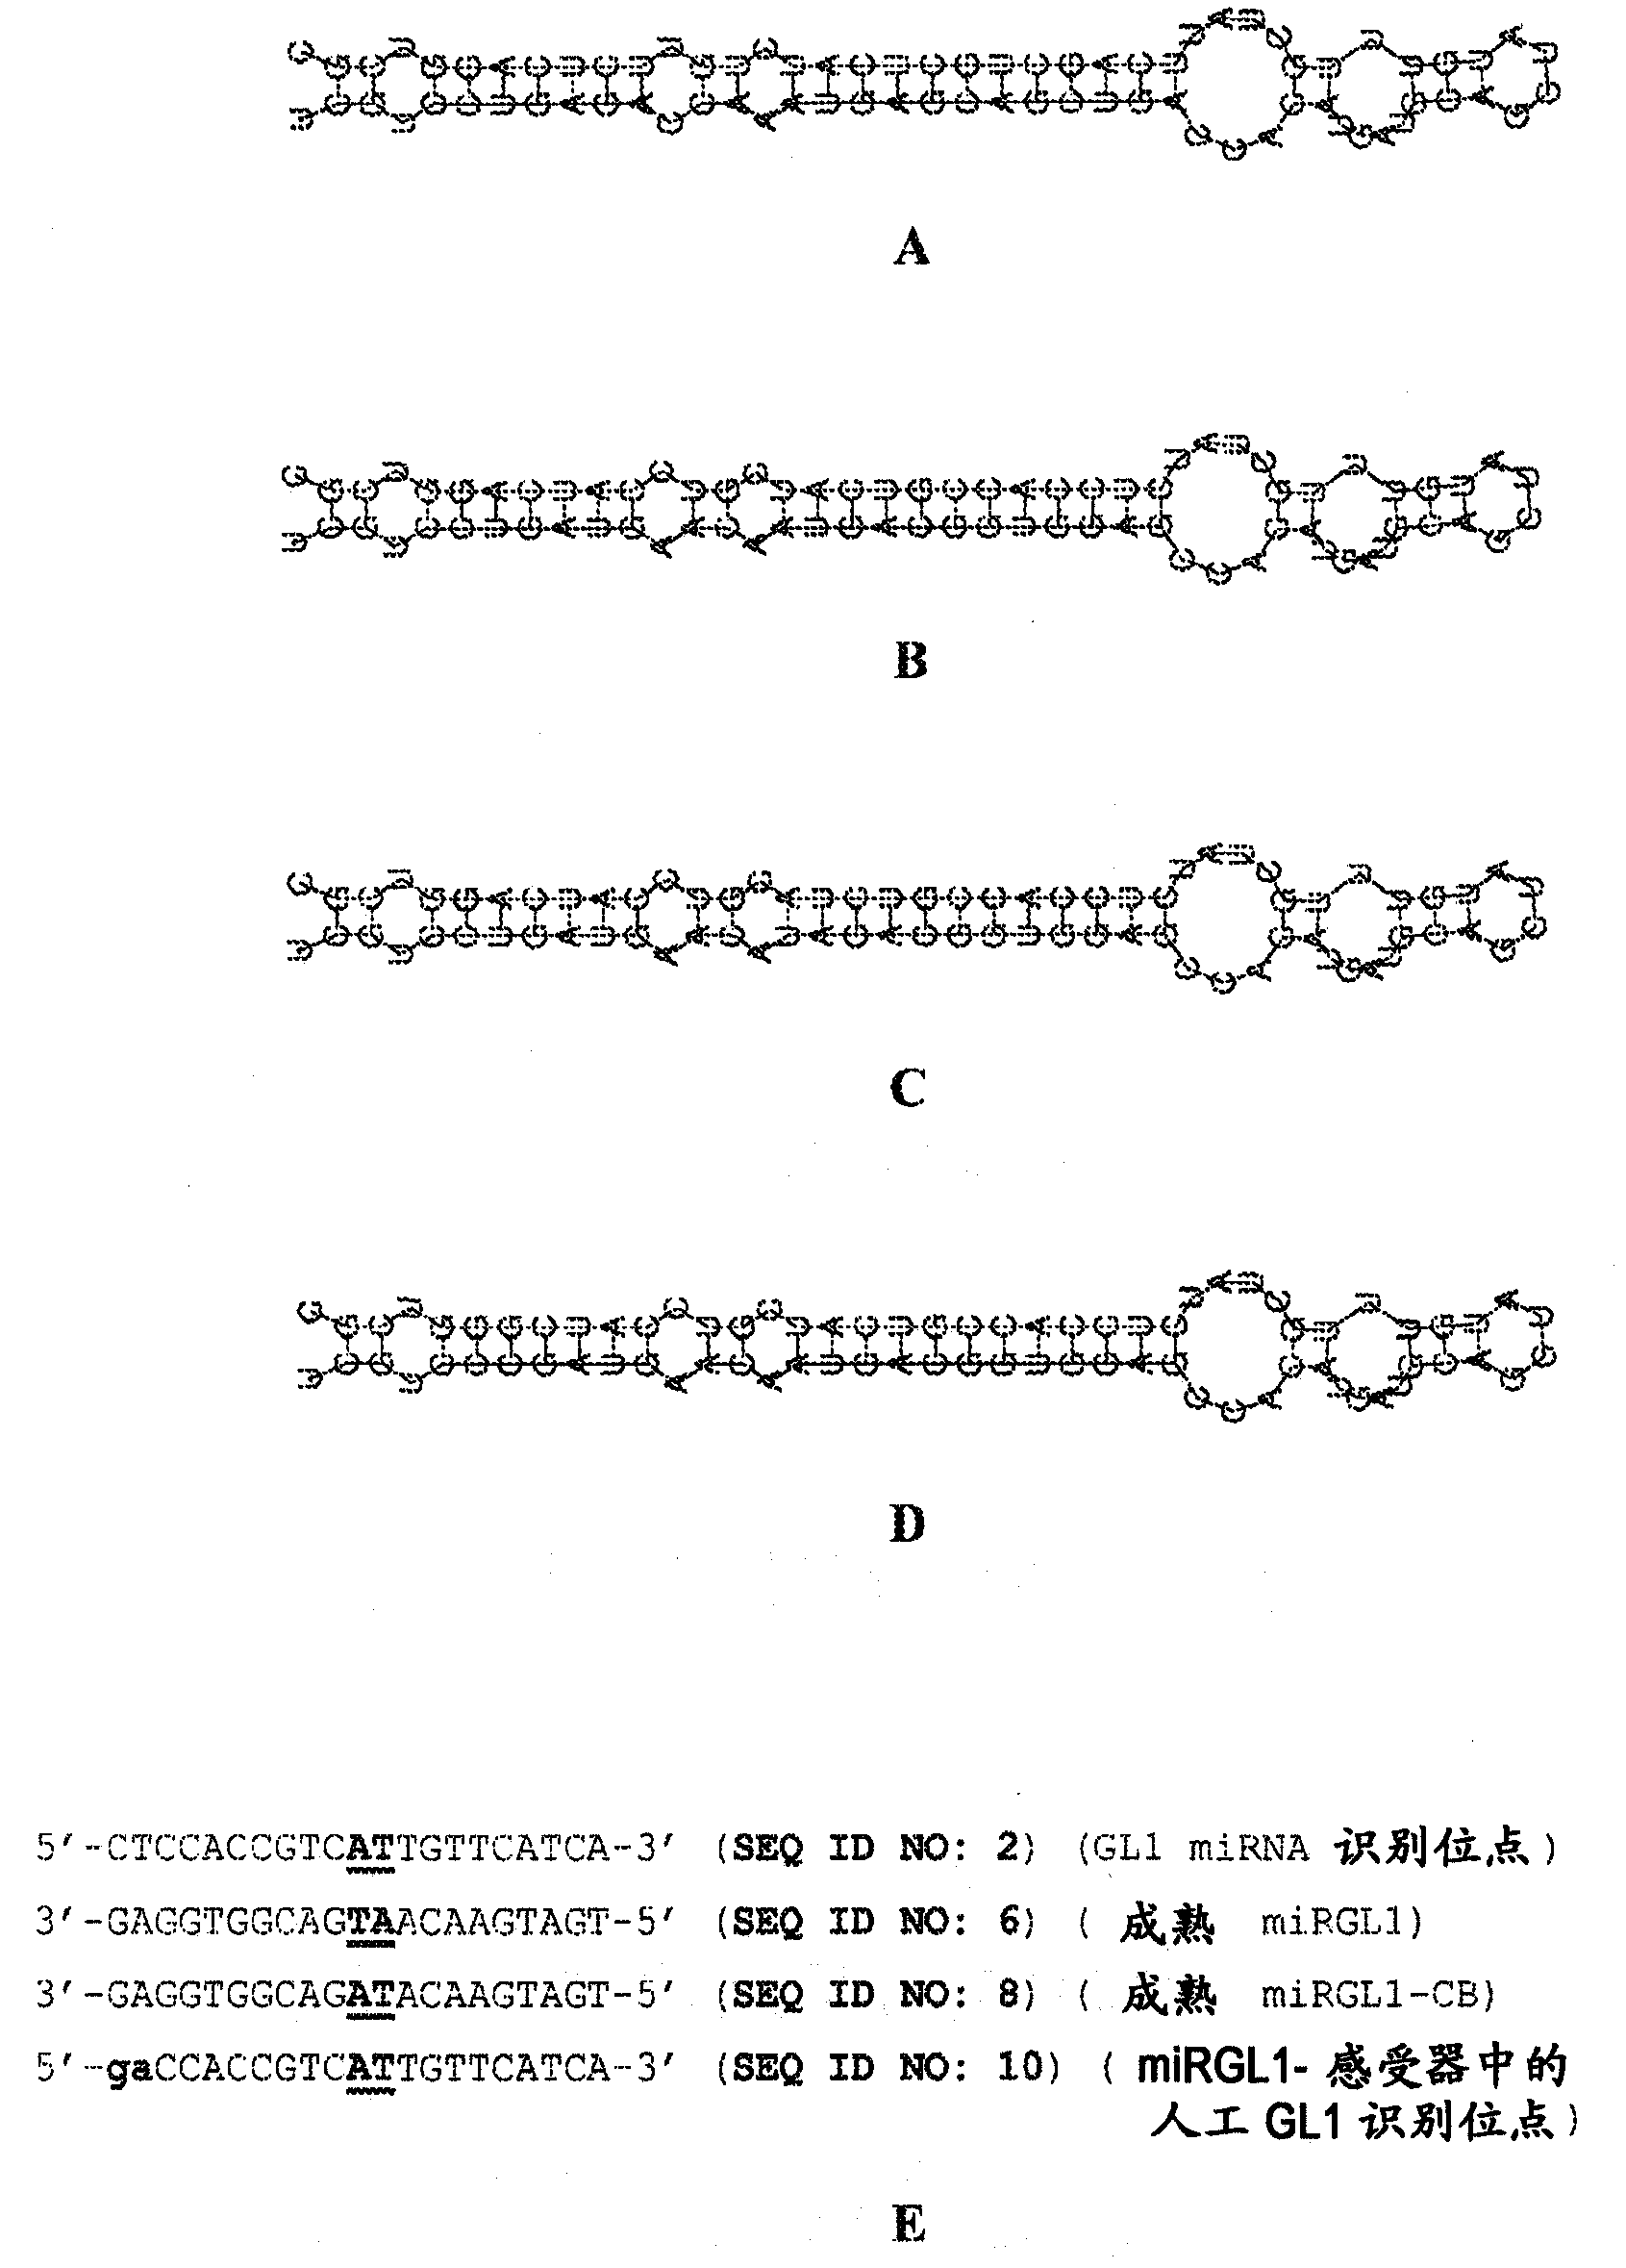 Recombinant DNA constructs and methods for modulating expression of a target gene